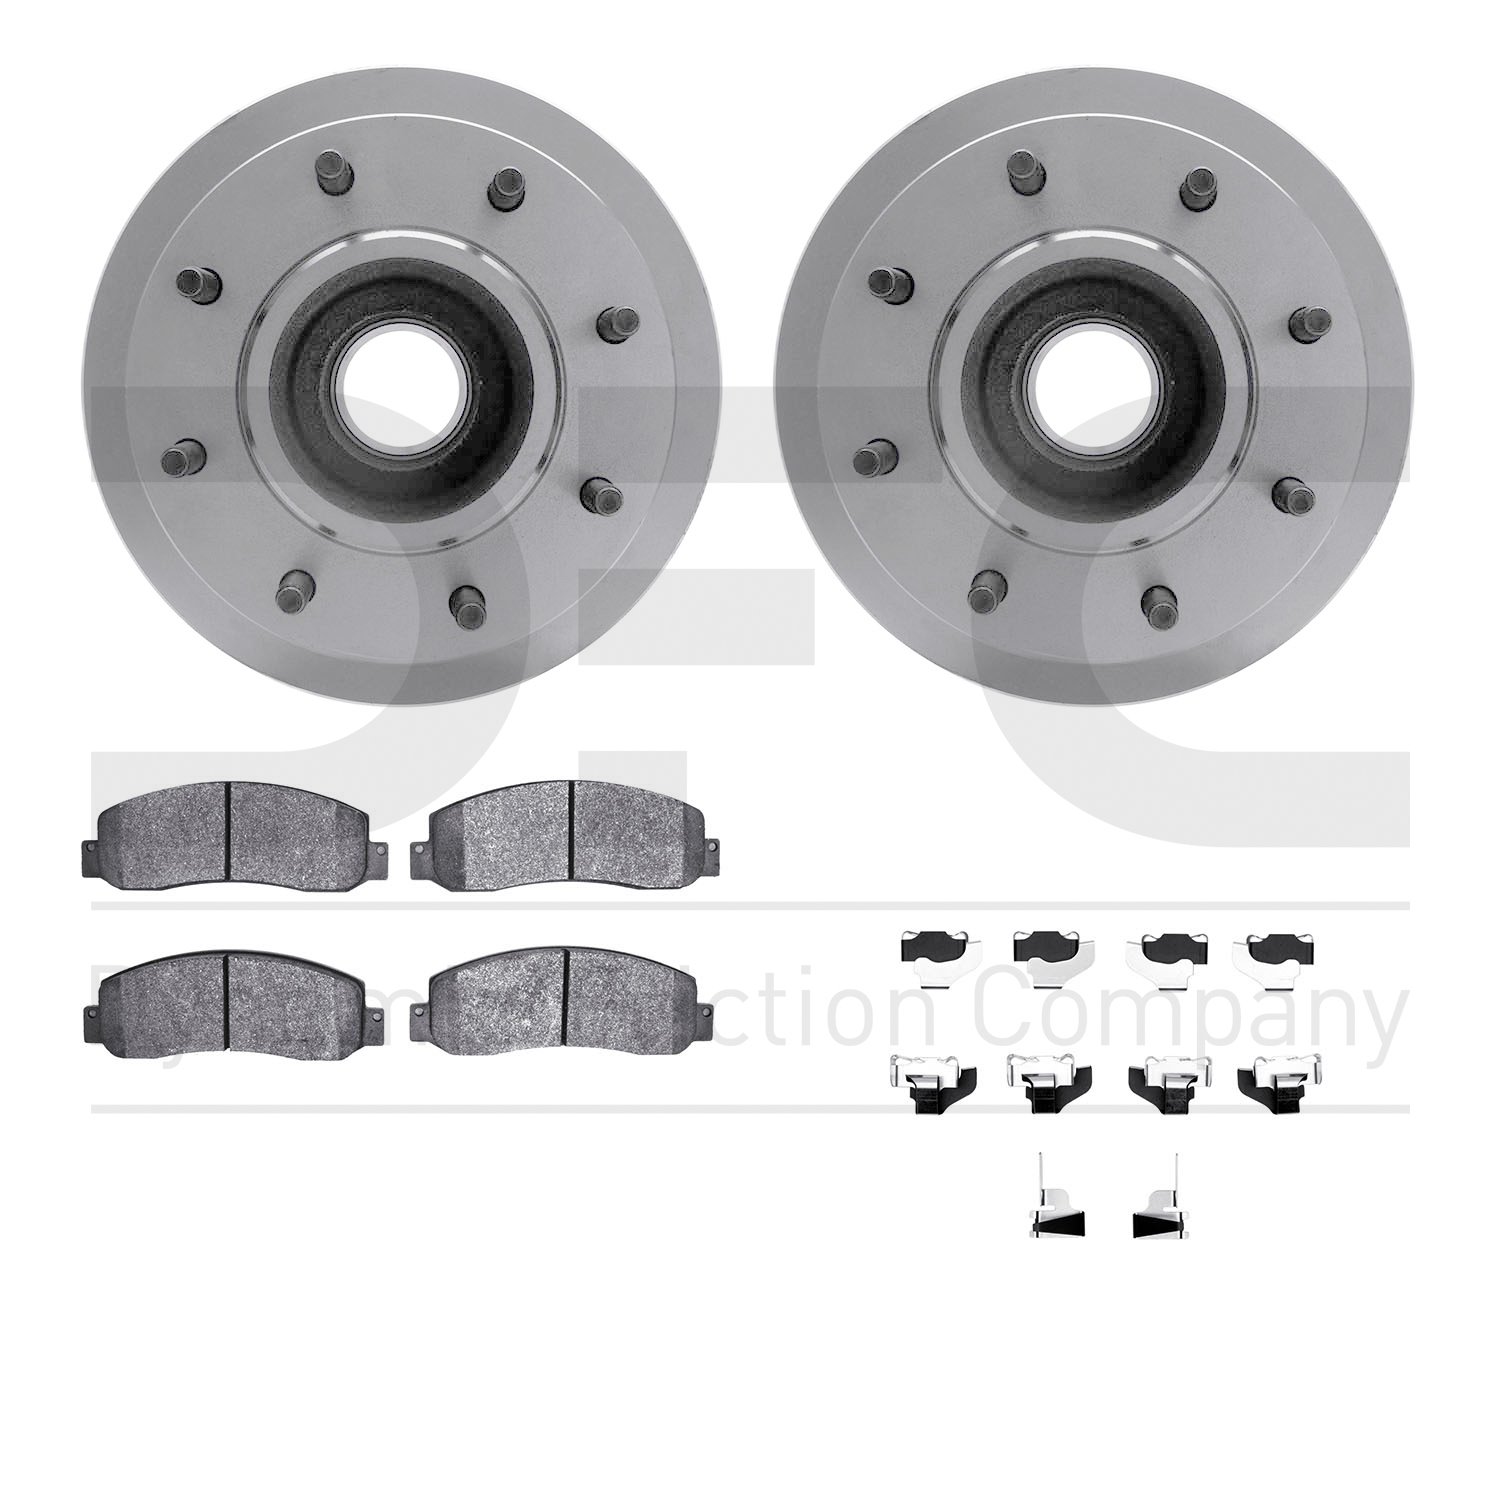 6412-54275 Brake Rotors with Ultimate-Duty Brake Pads Kit & Hardware, 2006-2010 Ford/Lincoln/Mercury/Mazda, Position: Front